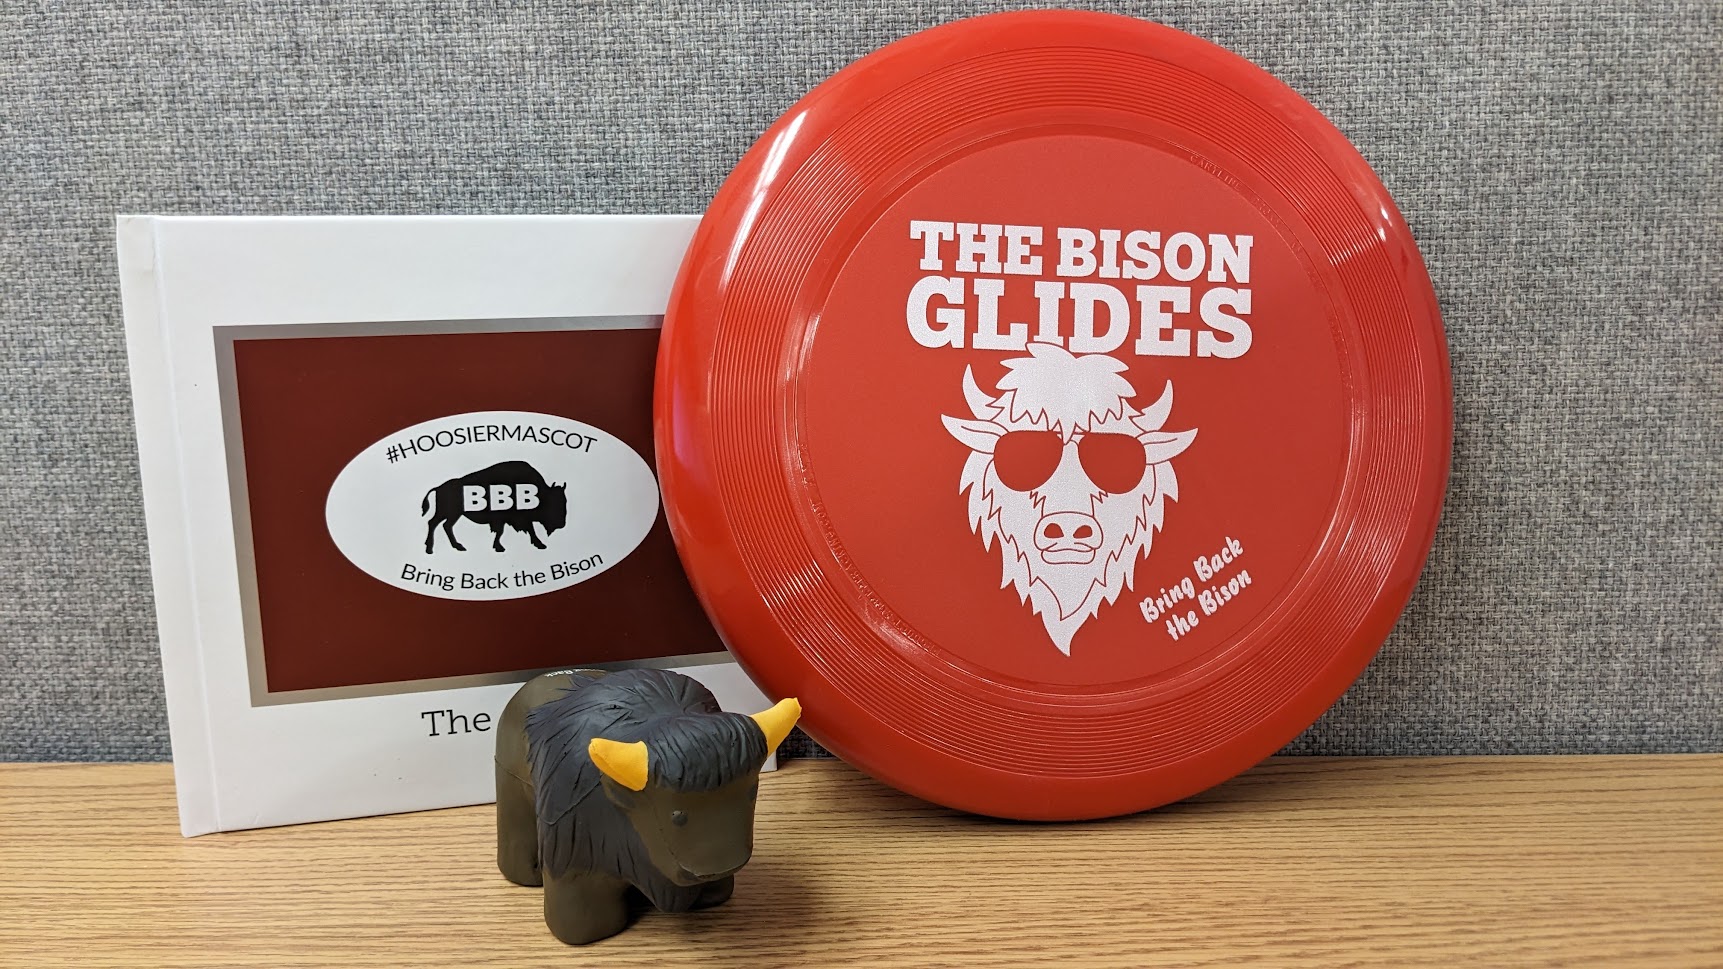 Photograph of a frisbee and stress relief ball all featuring the image of a bison